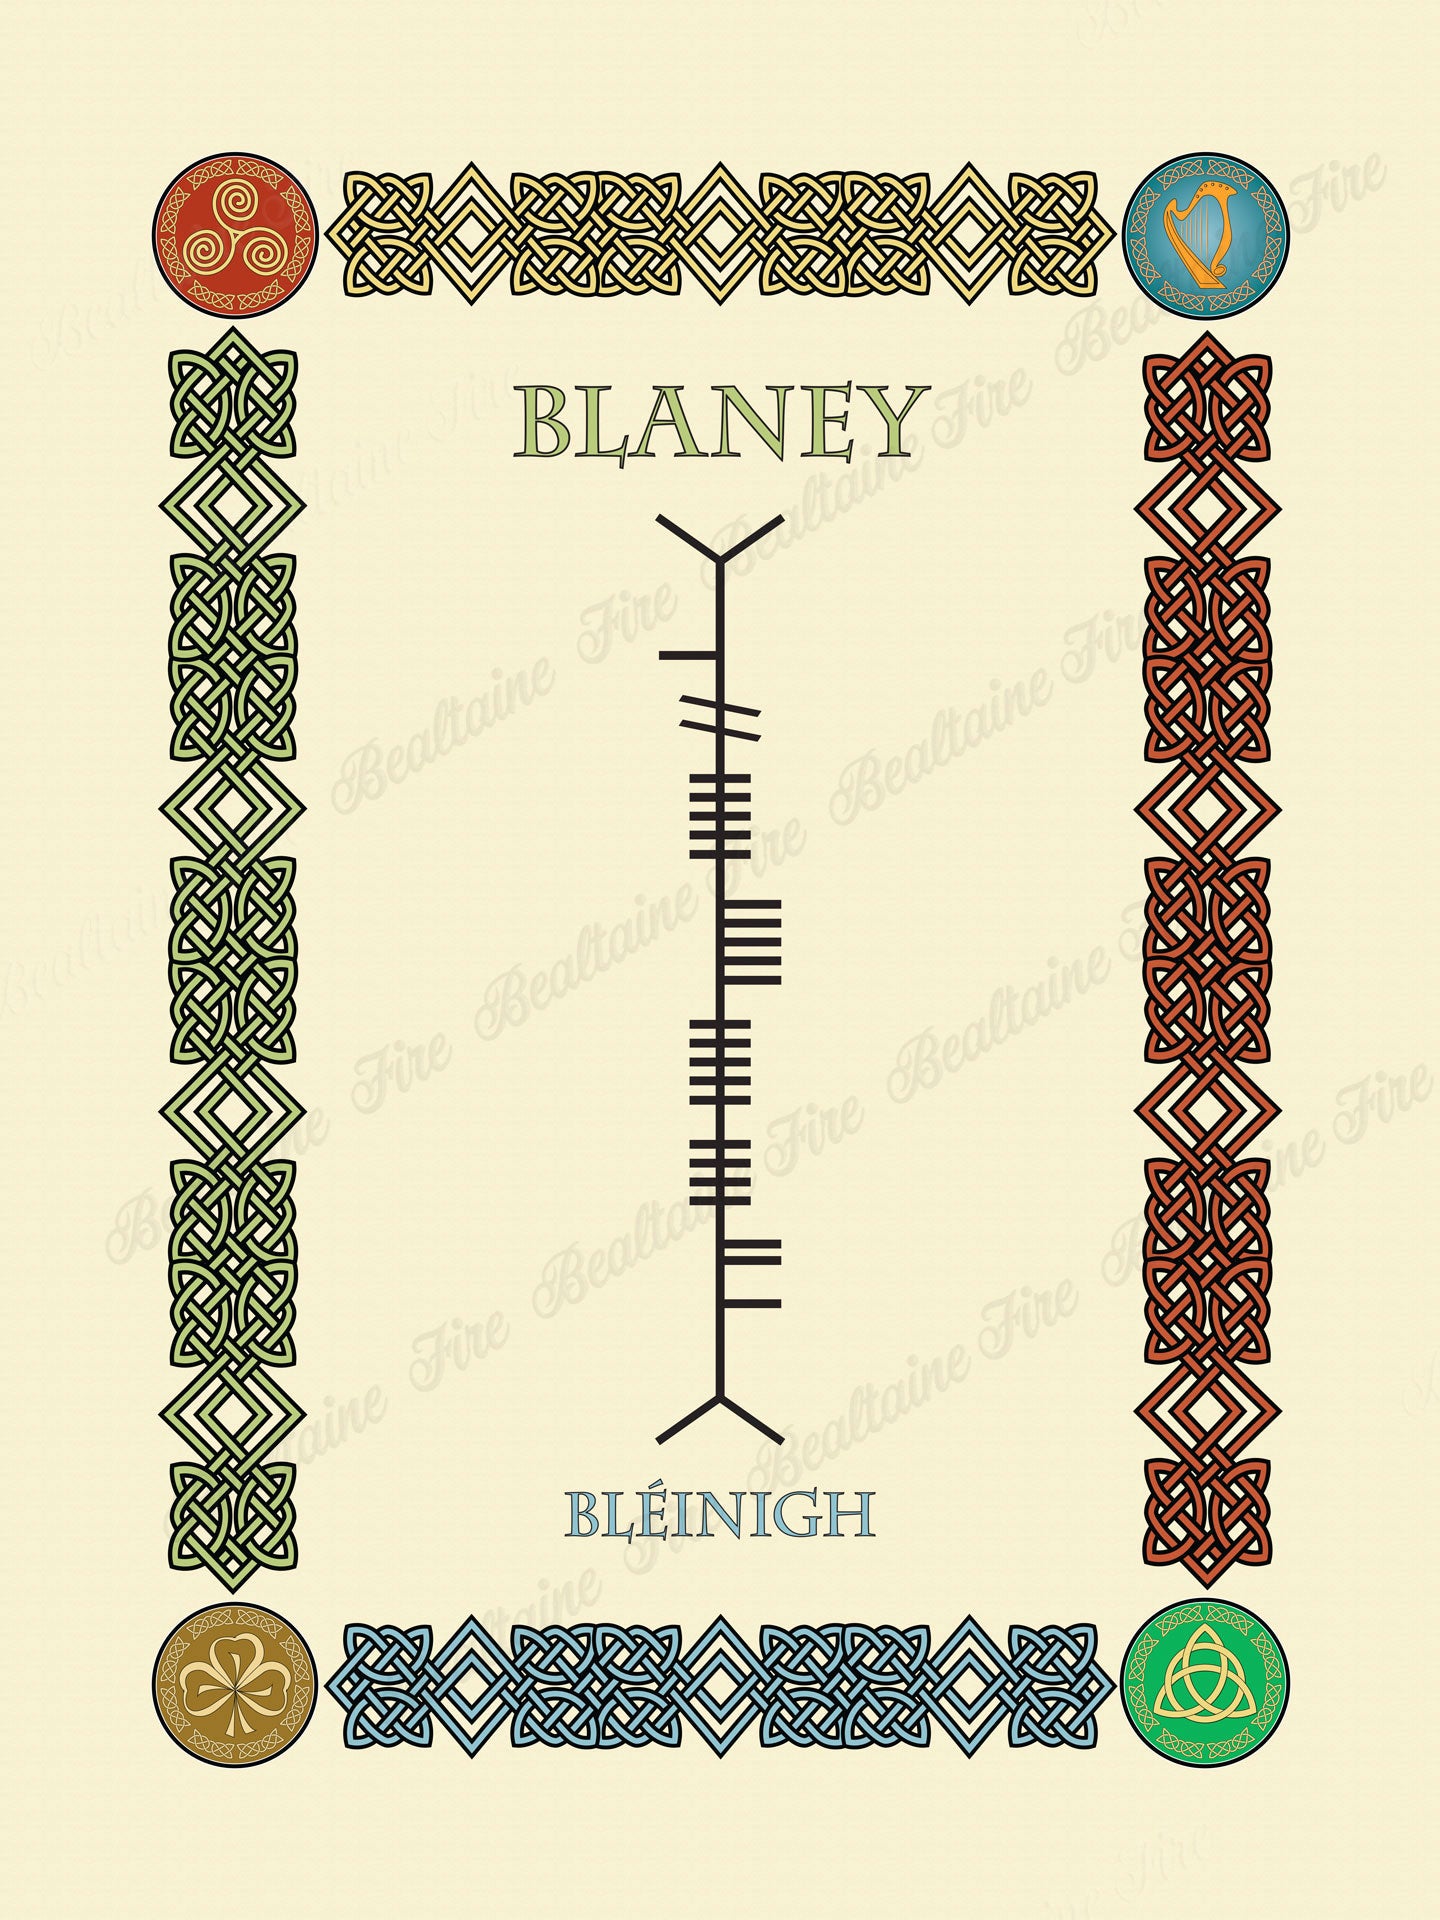 Blaney in Old Irish and Ogham - PDF Download